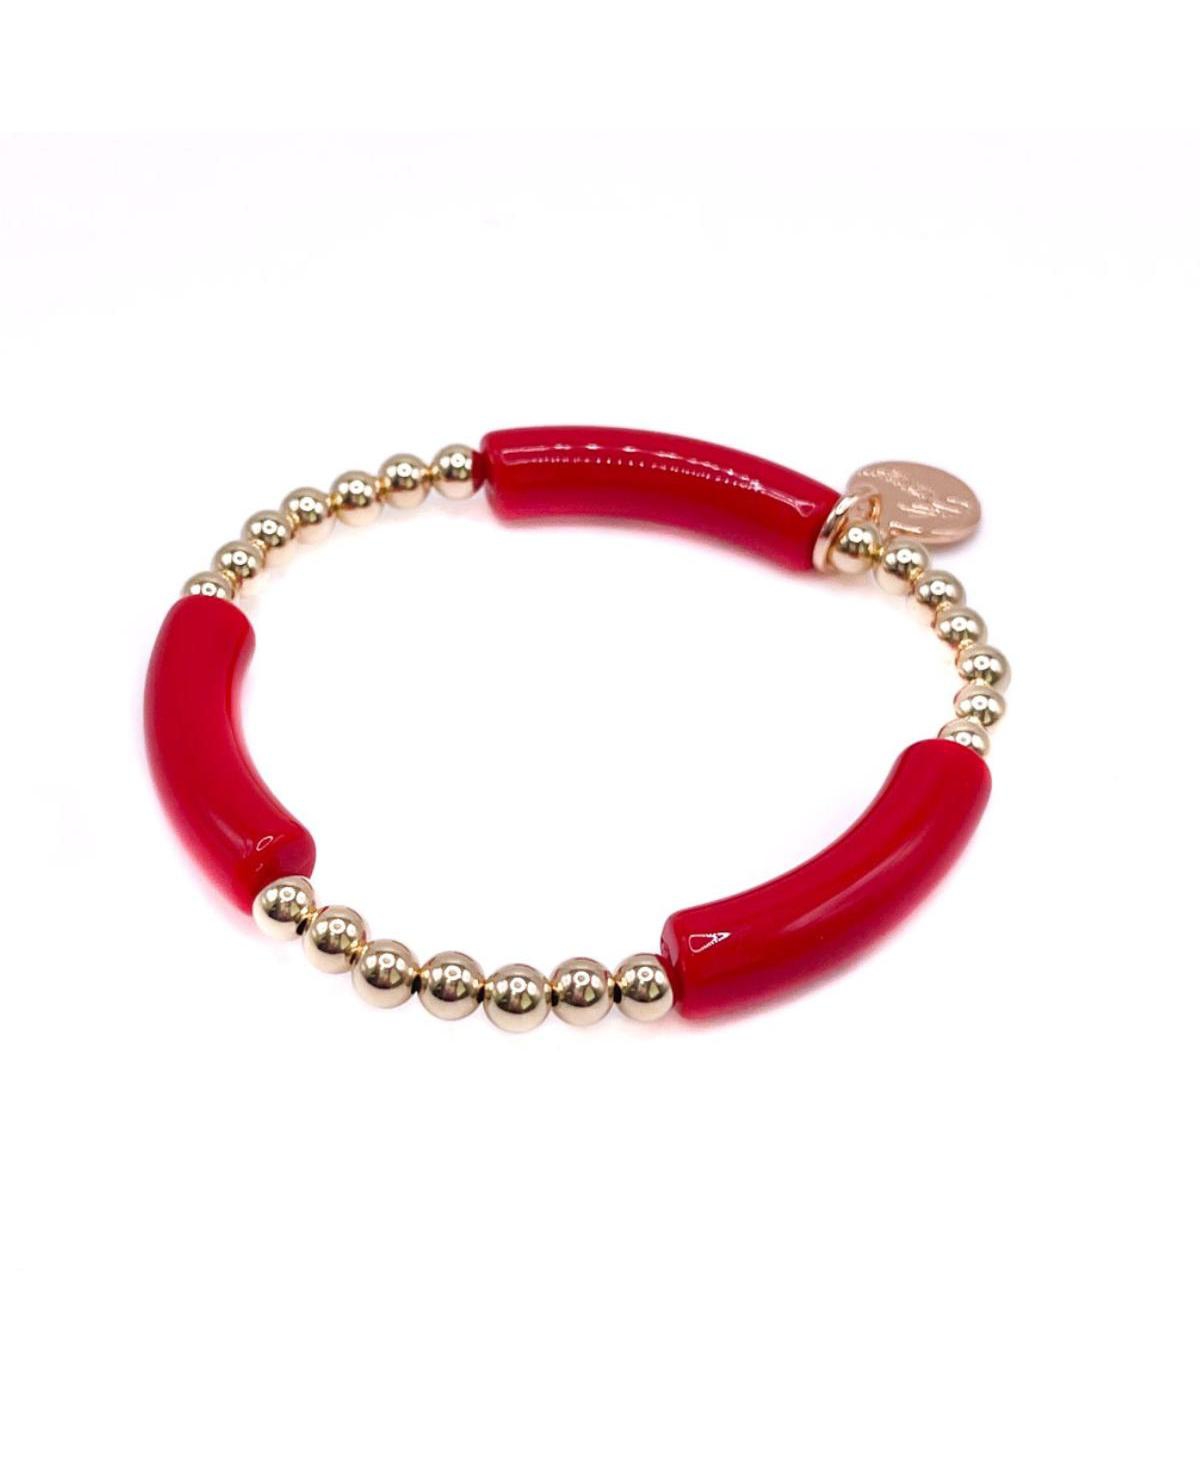 Non-Tarnishing Gold filled, 5mm Gold Ball and Acrylic Stretch Bracelet - Red